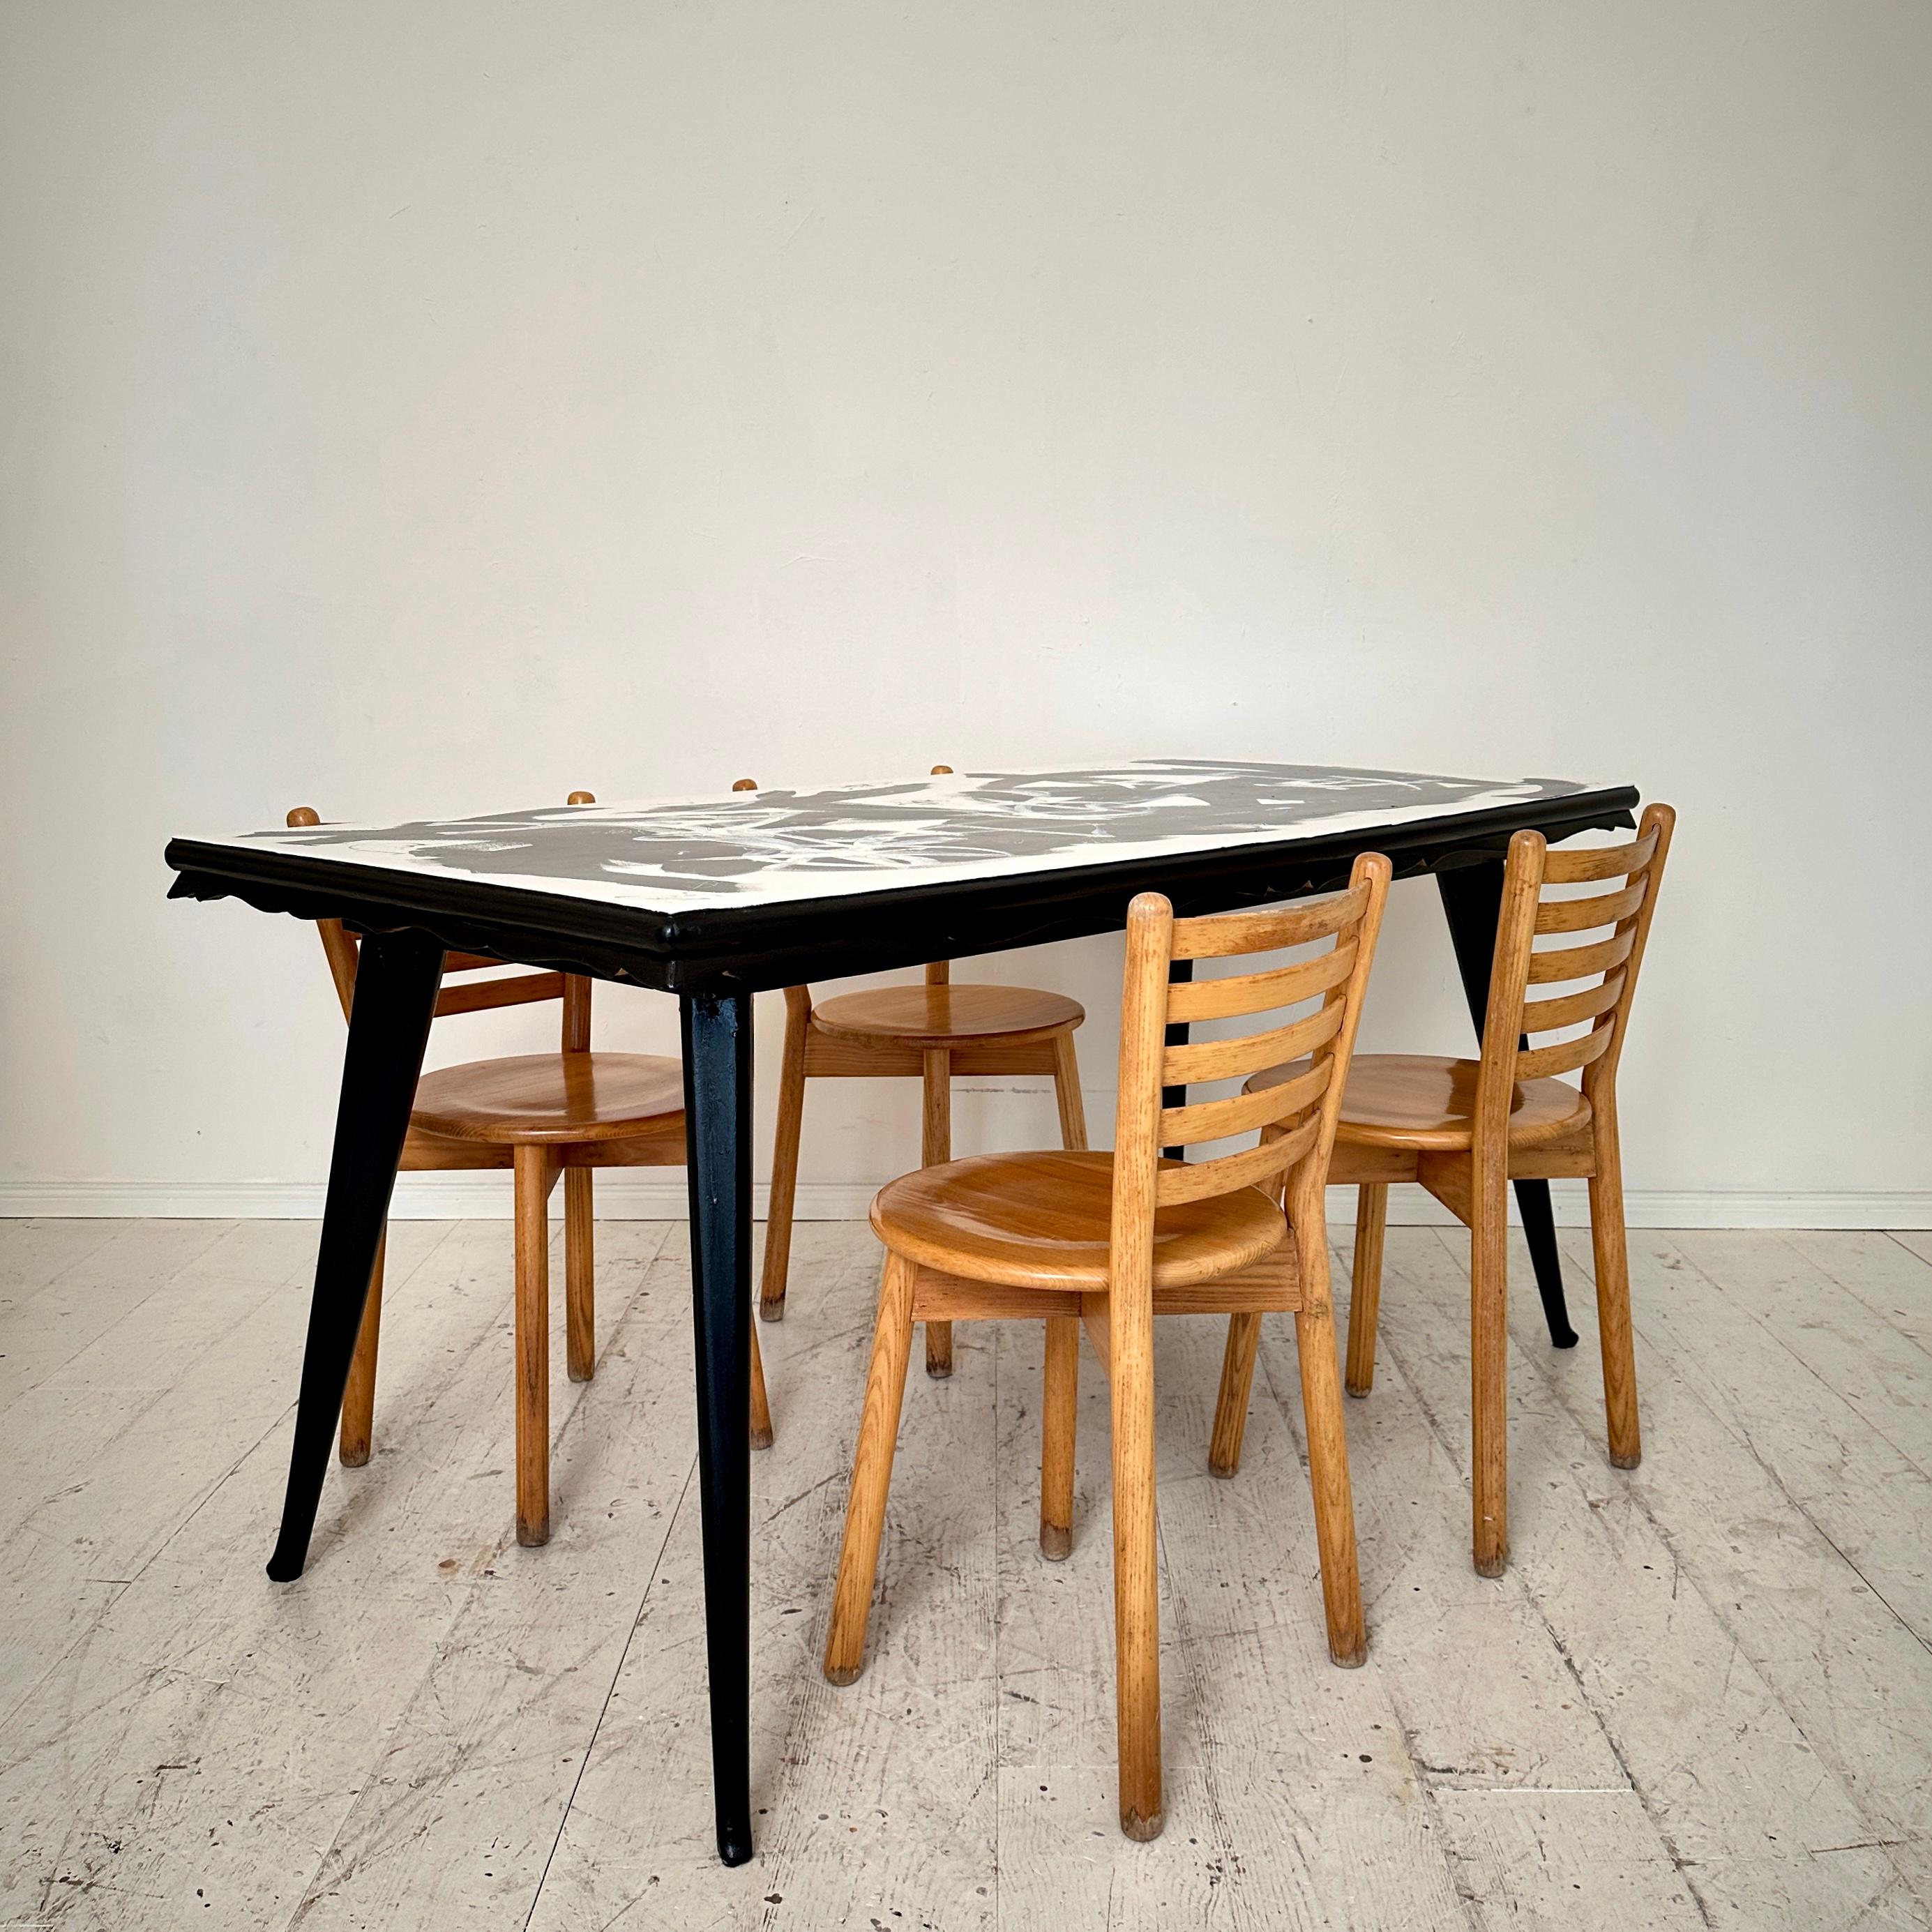 Contemporary Abstract Painted Dining Table in Black and White, 1950s Base For Sale 1